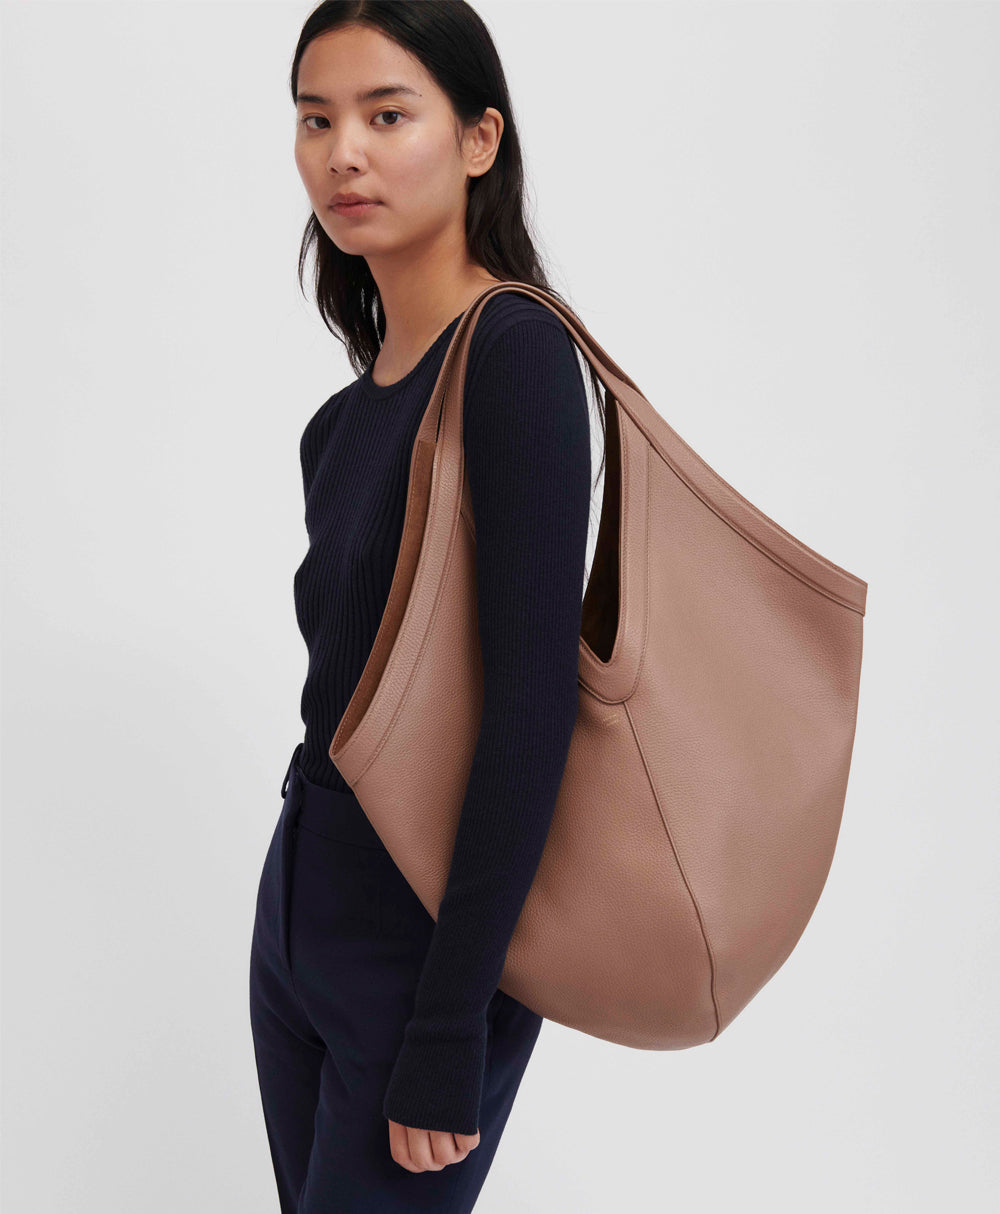 Folded leather tote Mansur Gavriel Navy in Leather - 35068141